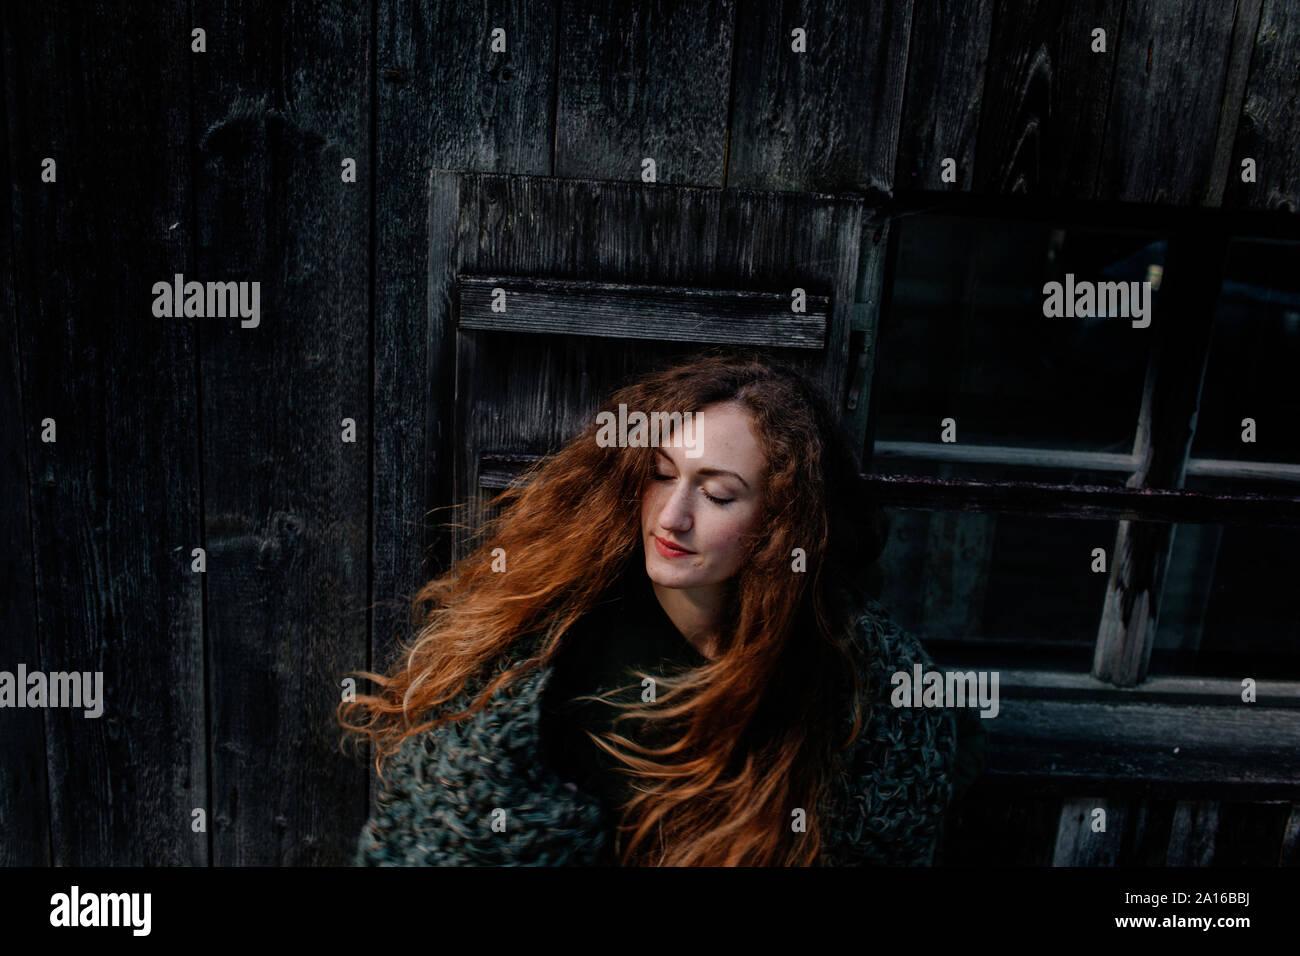 Portrait of redheaded woman with closed eyes, wooden wall in the background Stock Photo